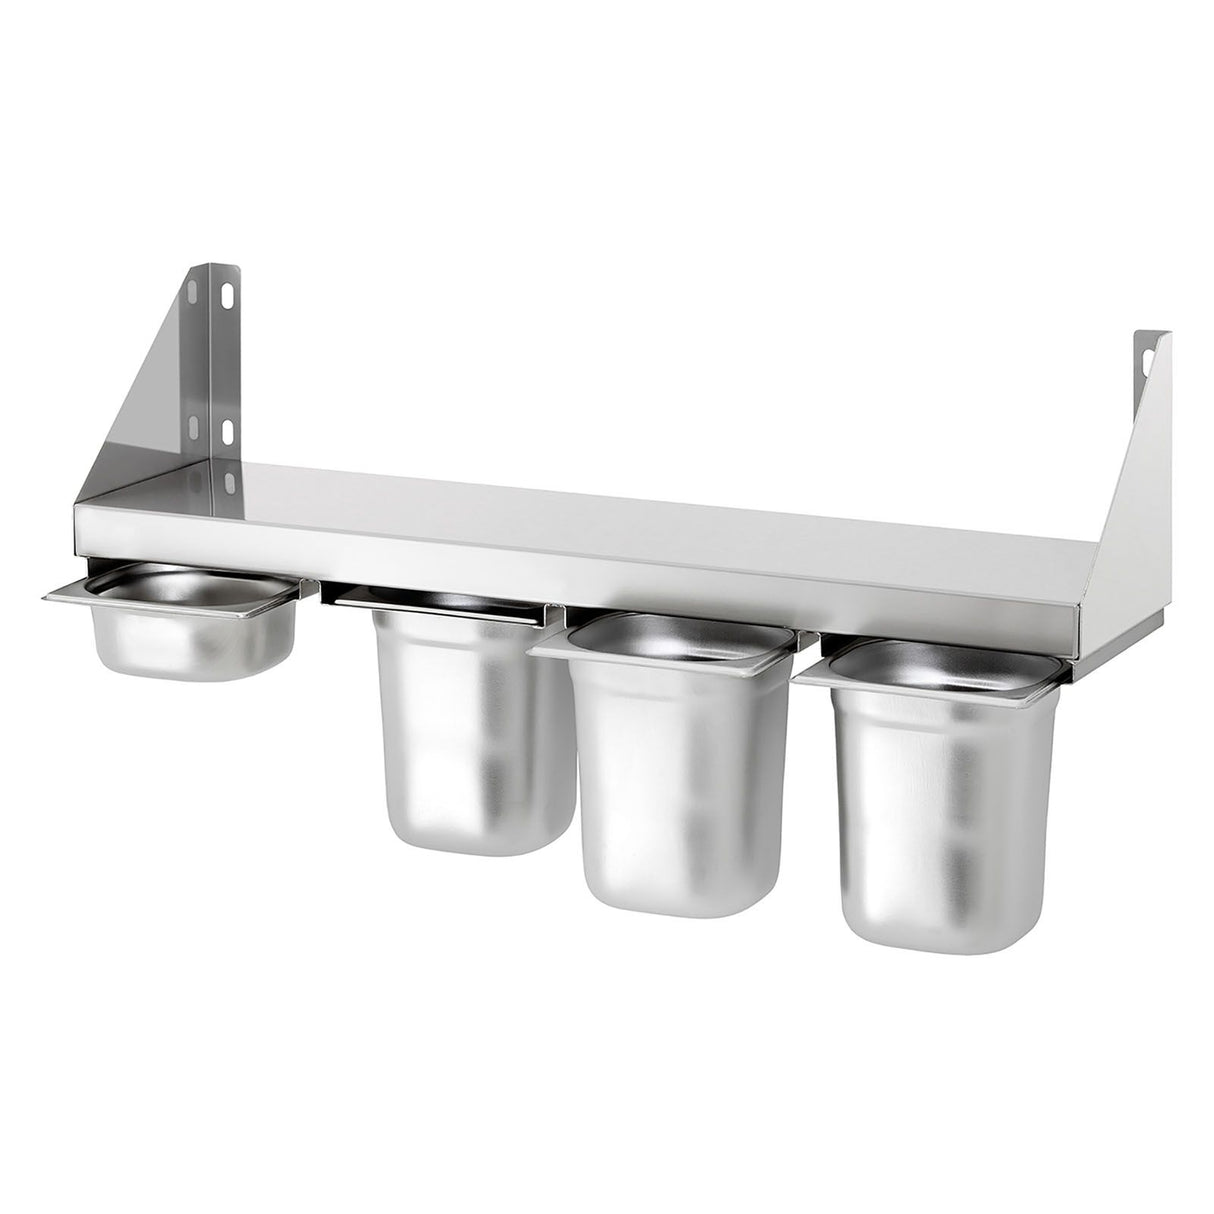 Empire Wall Mounted Shelf With 6 GN Pan Under Rail 1200mm - EMP-WM12030E Stainless Steel Wall Shelves Empire   